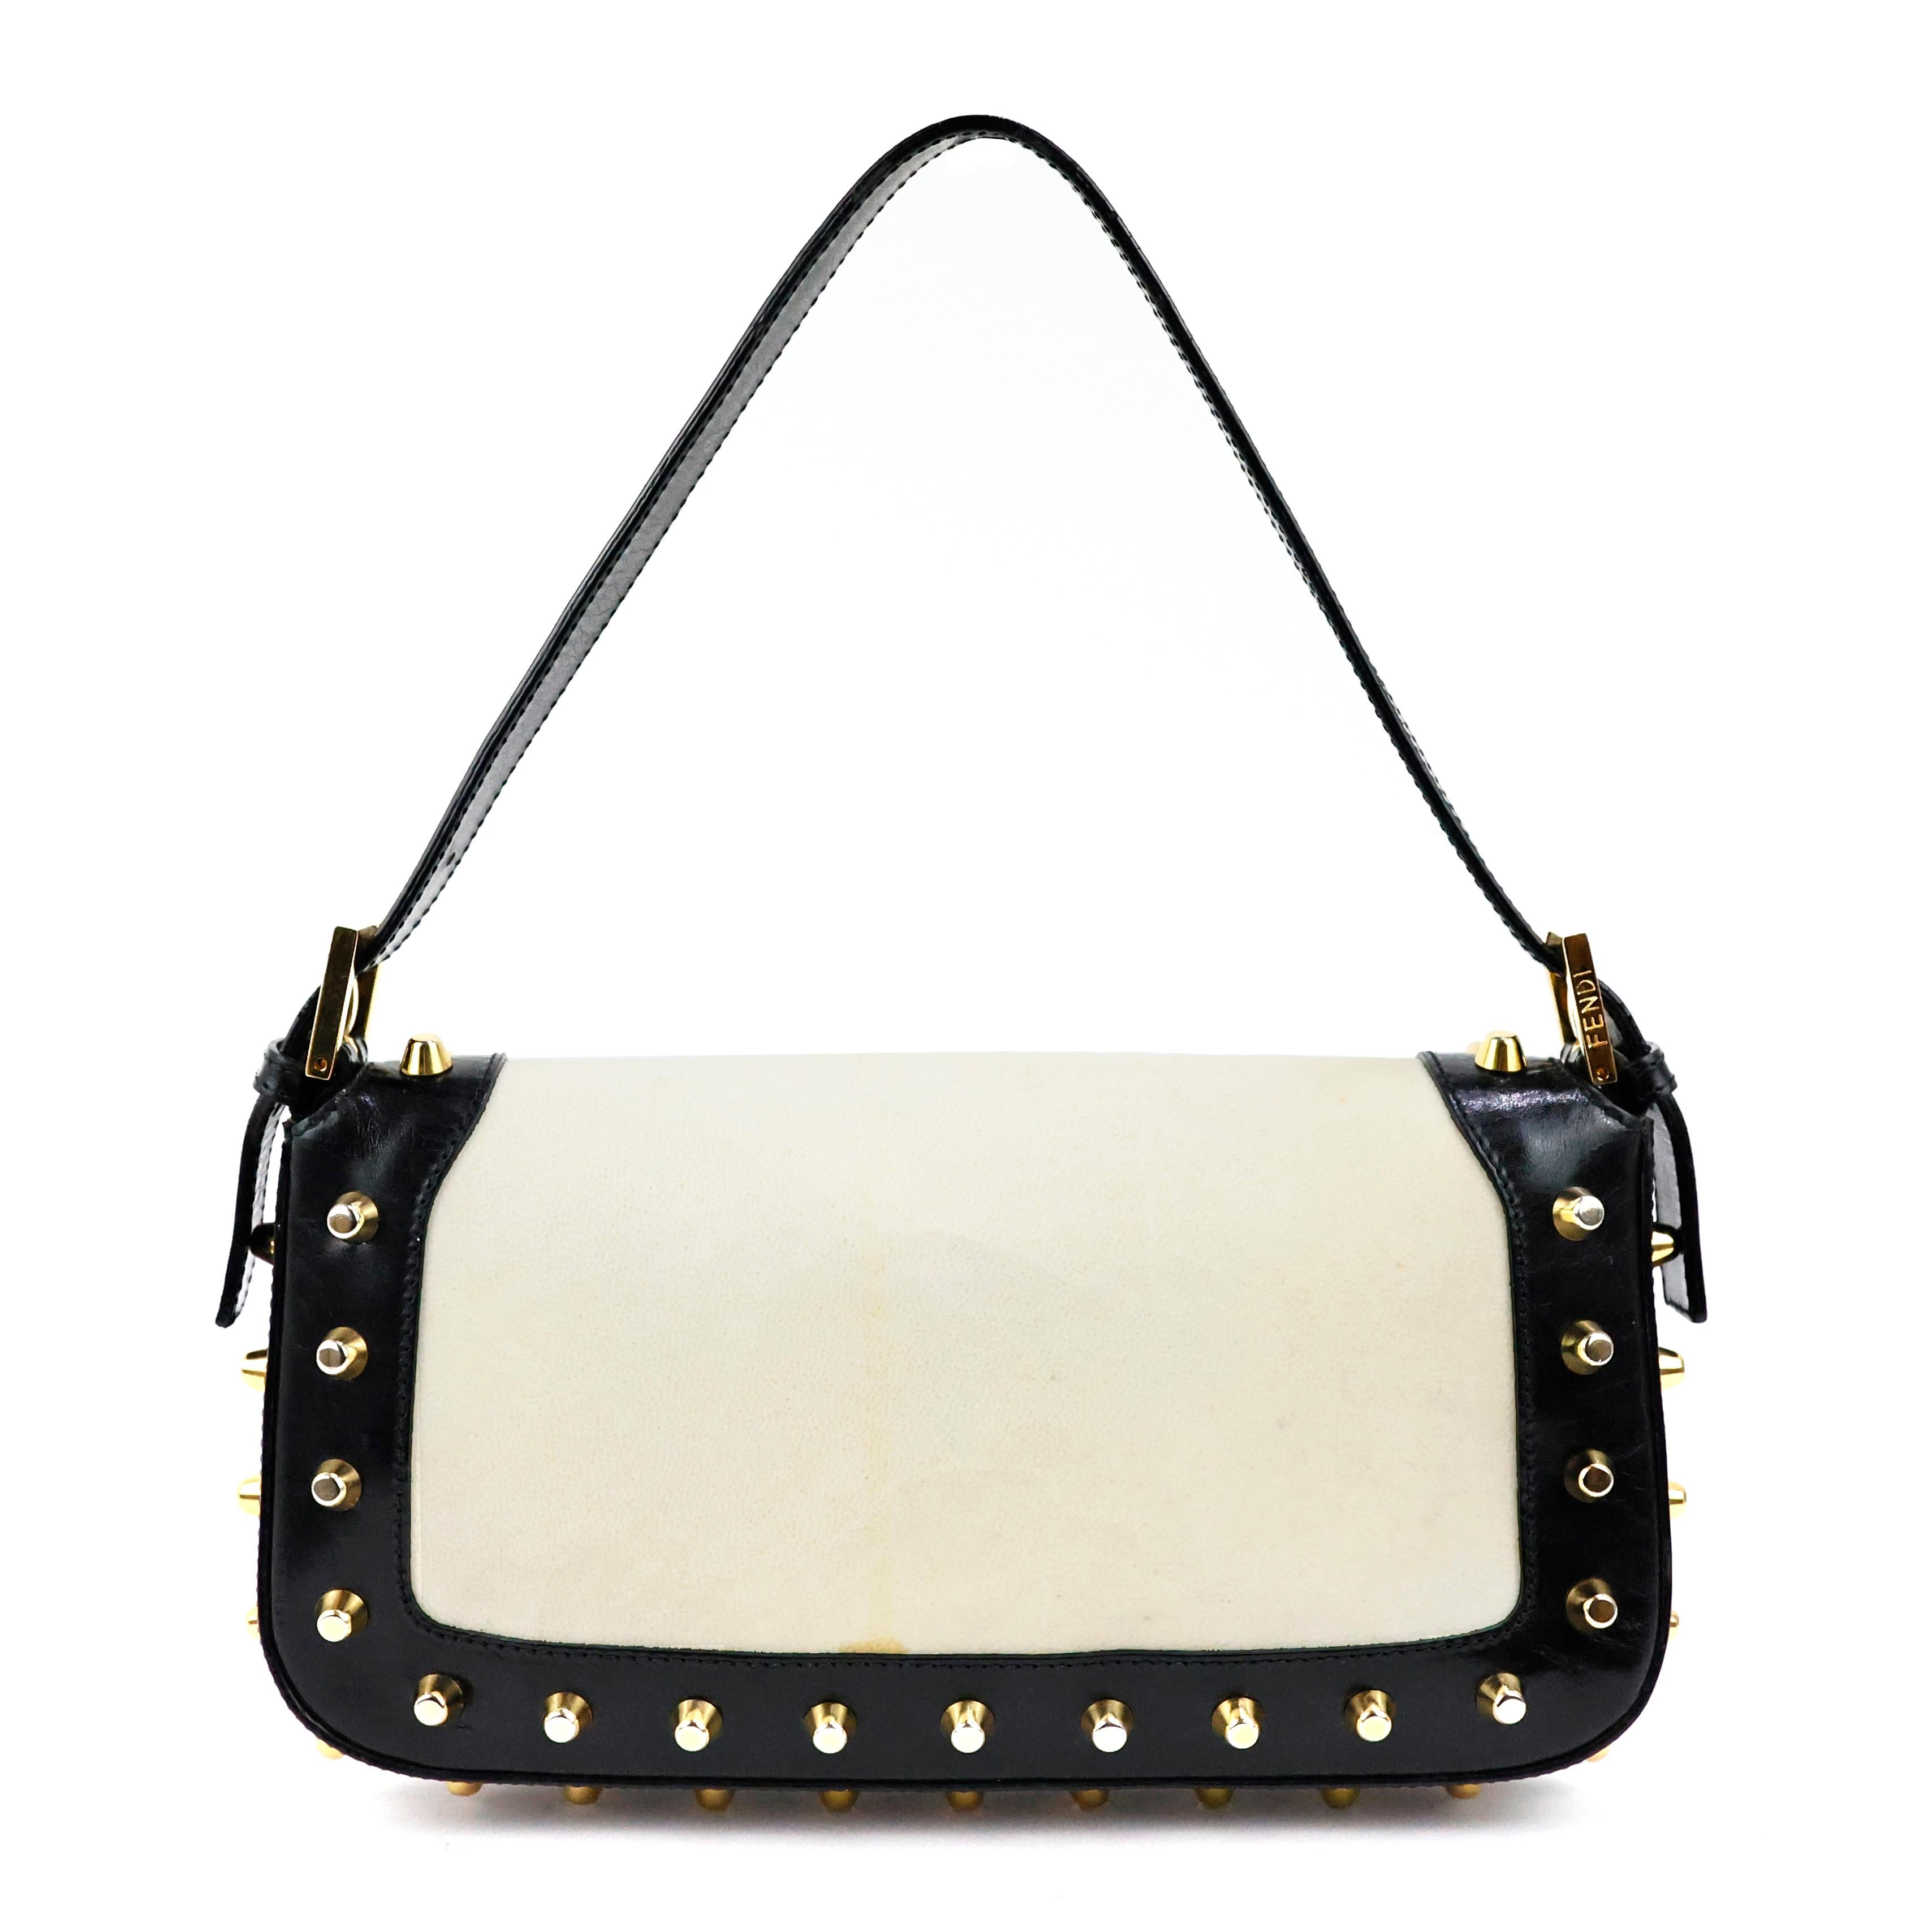 Fendi baguette studded with parchment + black calfskin leather, gold hardware.

Condition:
Good. To note: spot on the back of the bag, signs of wear on parchment.

Packing/accessories:
Dustbag.

Measurements: 
Width: 24 cm
Height: 14,5 cm
Depth: 4 cm